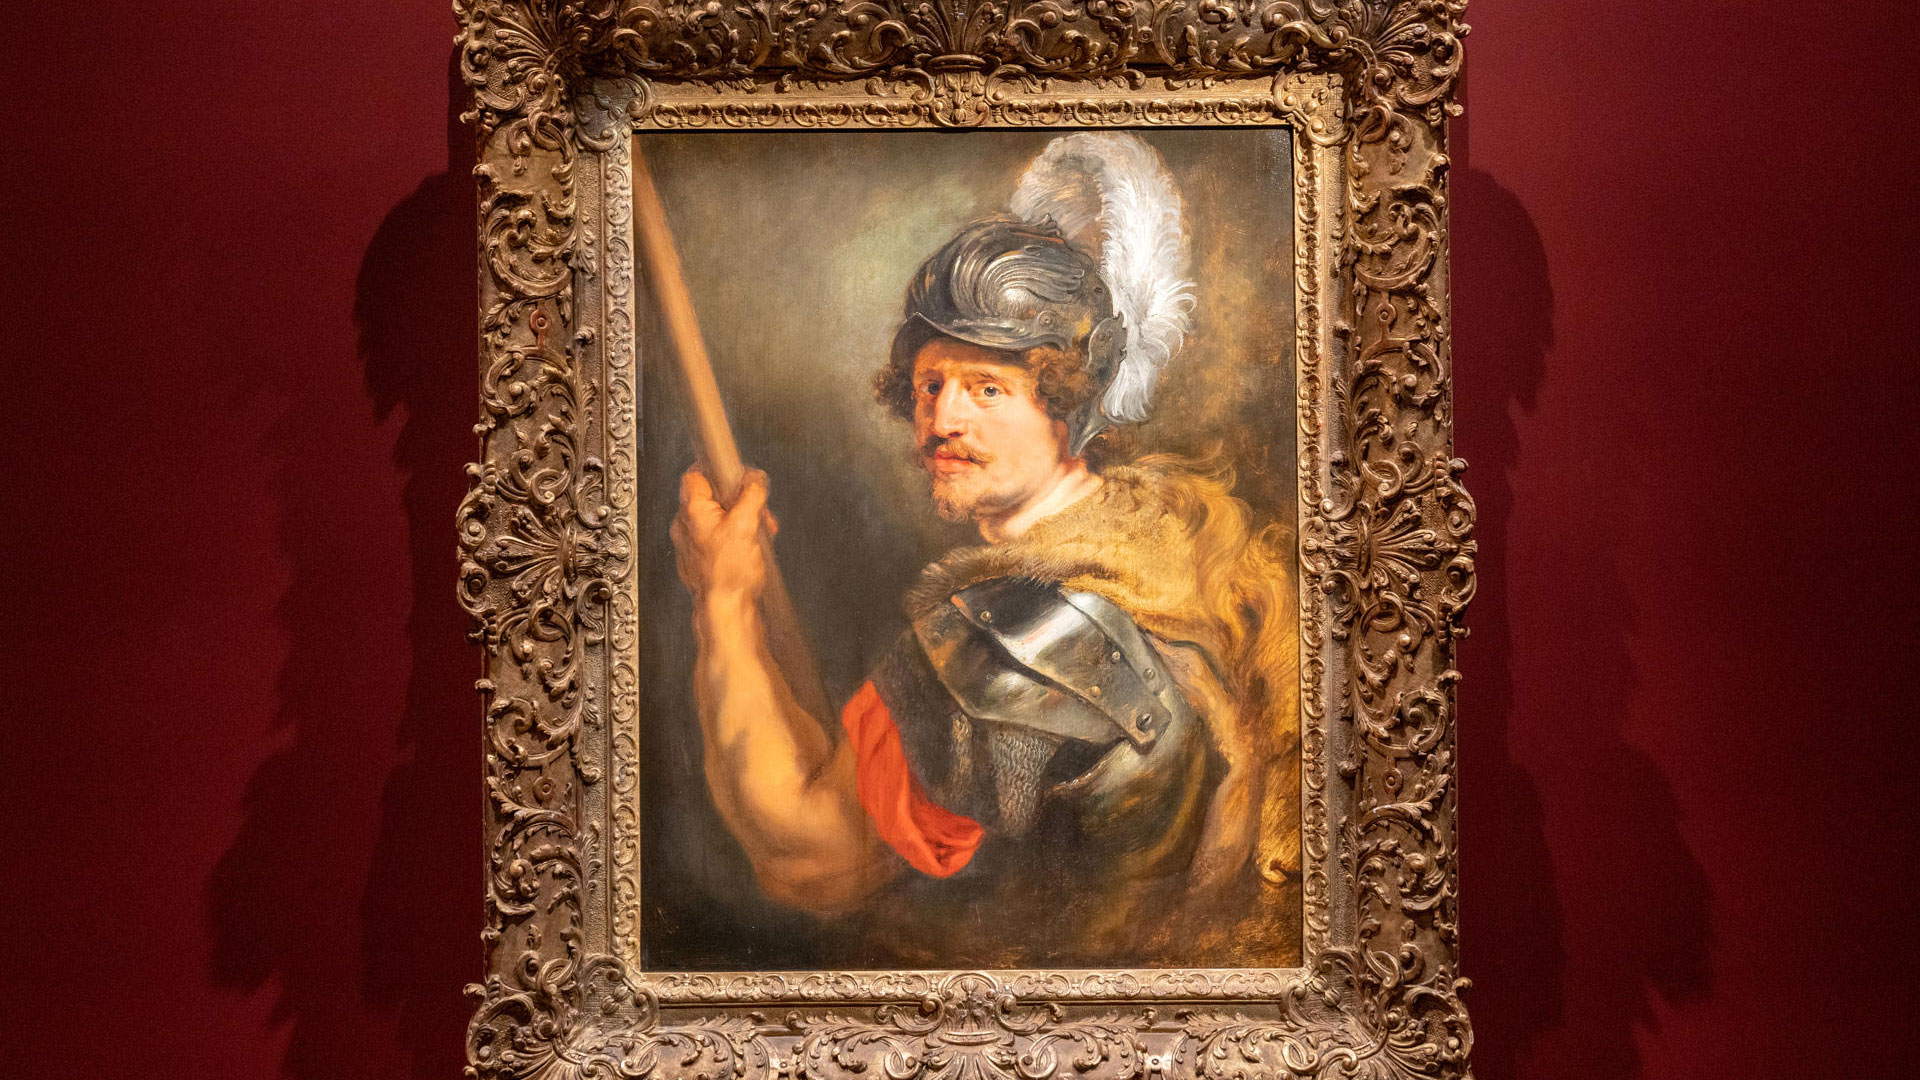 Photography of the work "Portrait of a Man as Mars" (Portrait of a Man Like Mars, 1620) by Peter Paul Rubens, which sold Tuesday for $26.2 million in the first major sale of the season at Sotheby's in New York.  EFE/Angel Colmenares